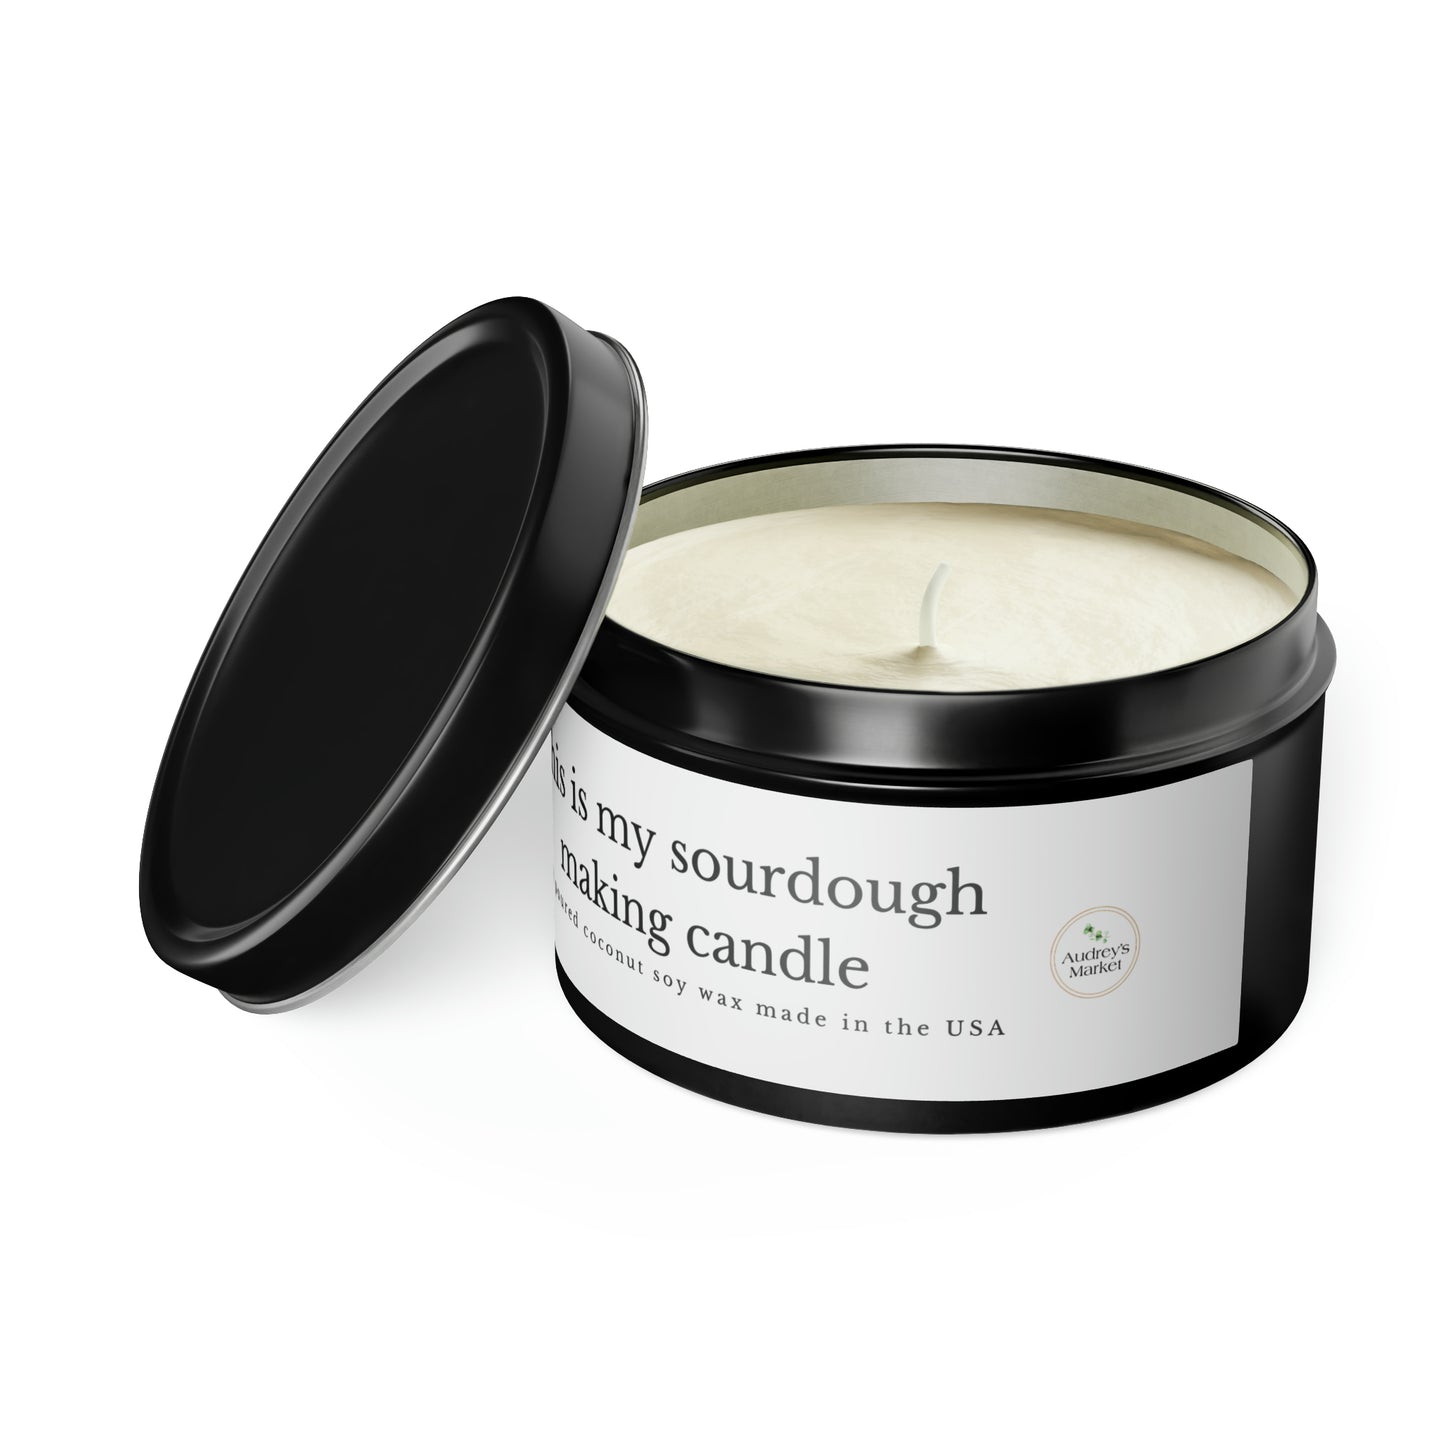 This Is My Sourdough Making Candle - Hand Poured in the USA, Available in 3 colors and 5 scents!